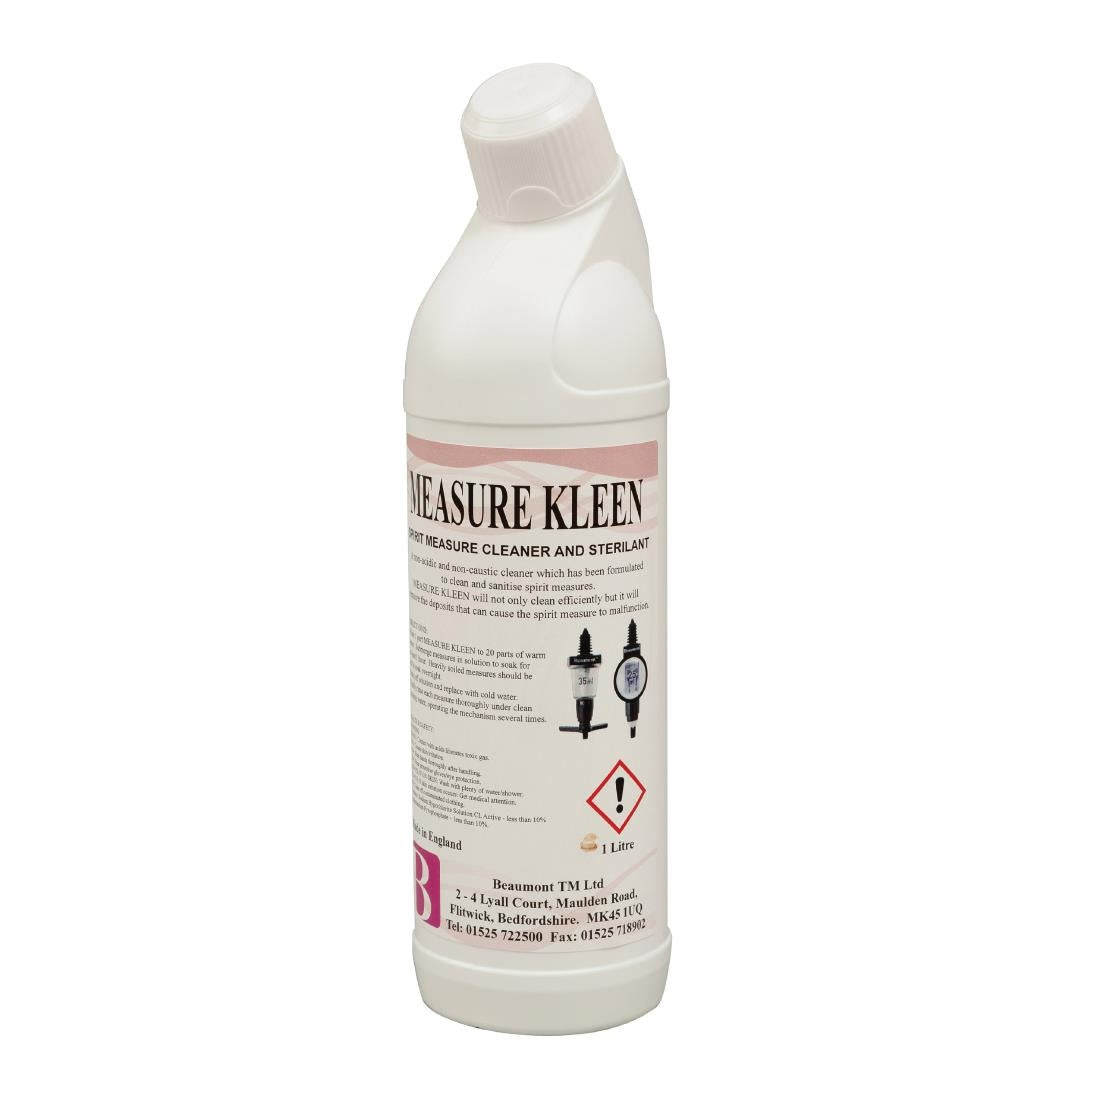 CZ300 Beaumont Liquid Measure Cleaner 1Ltr (Pack of 6) JD Catering Equipment Solutions Ltd